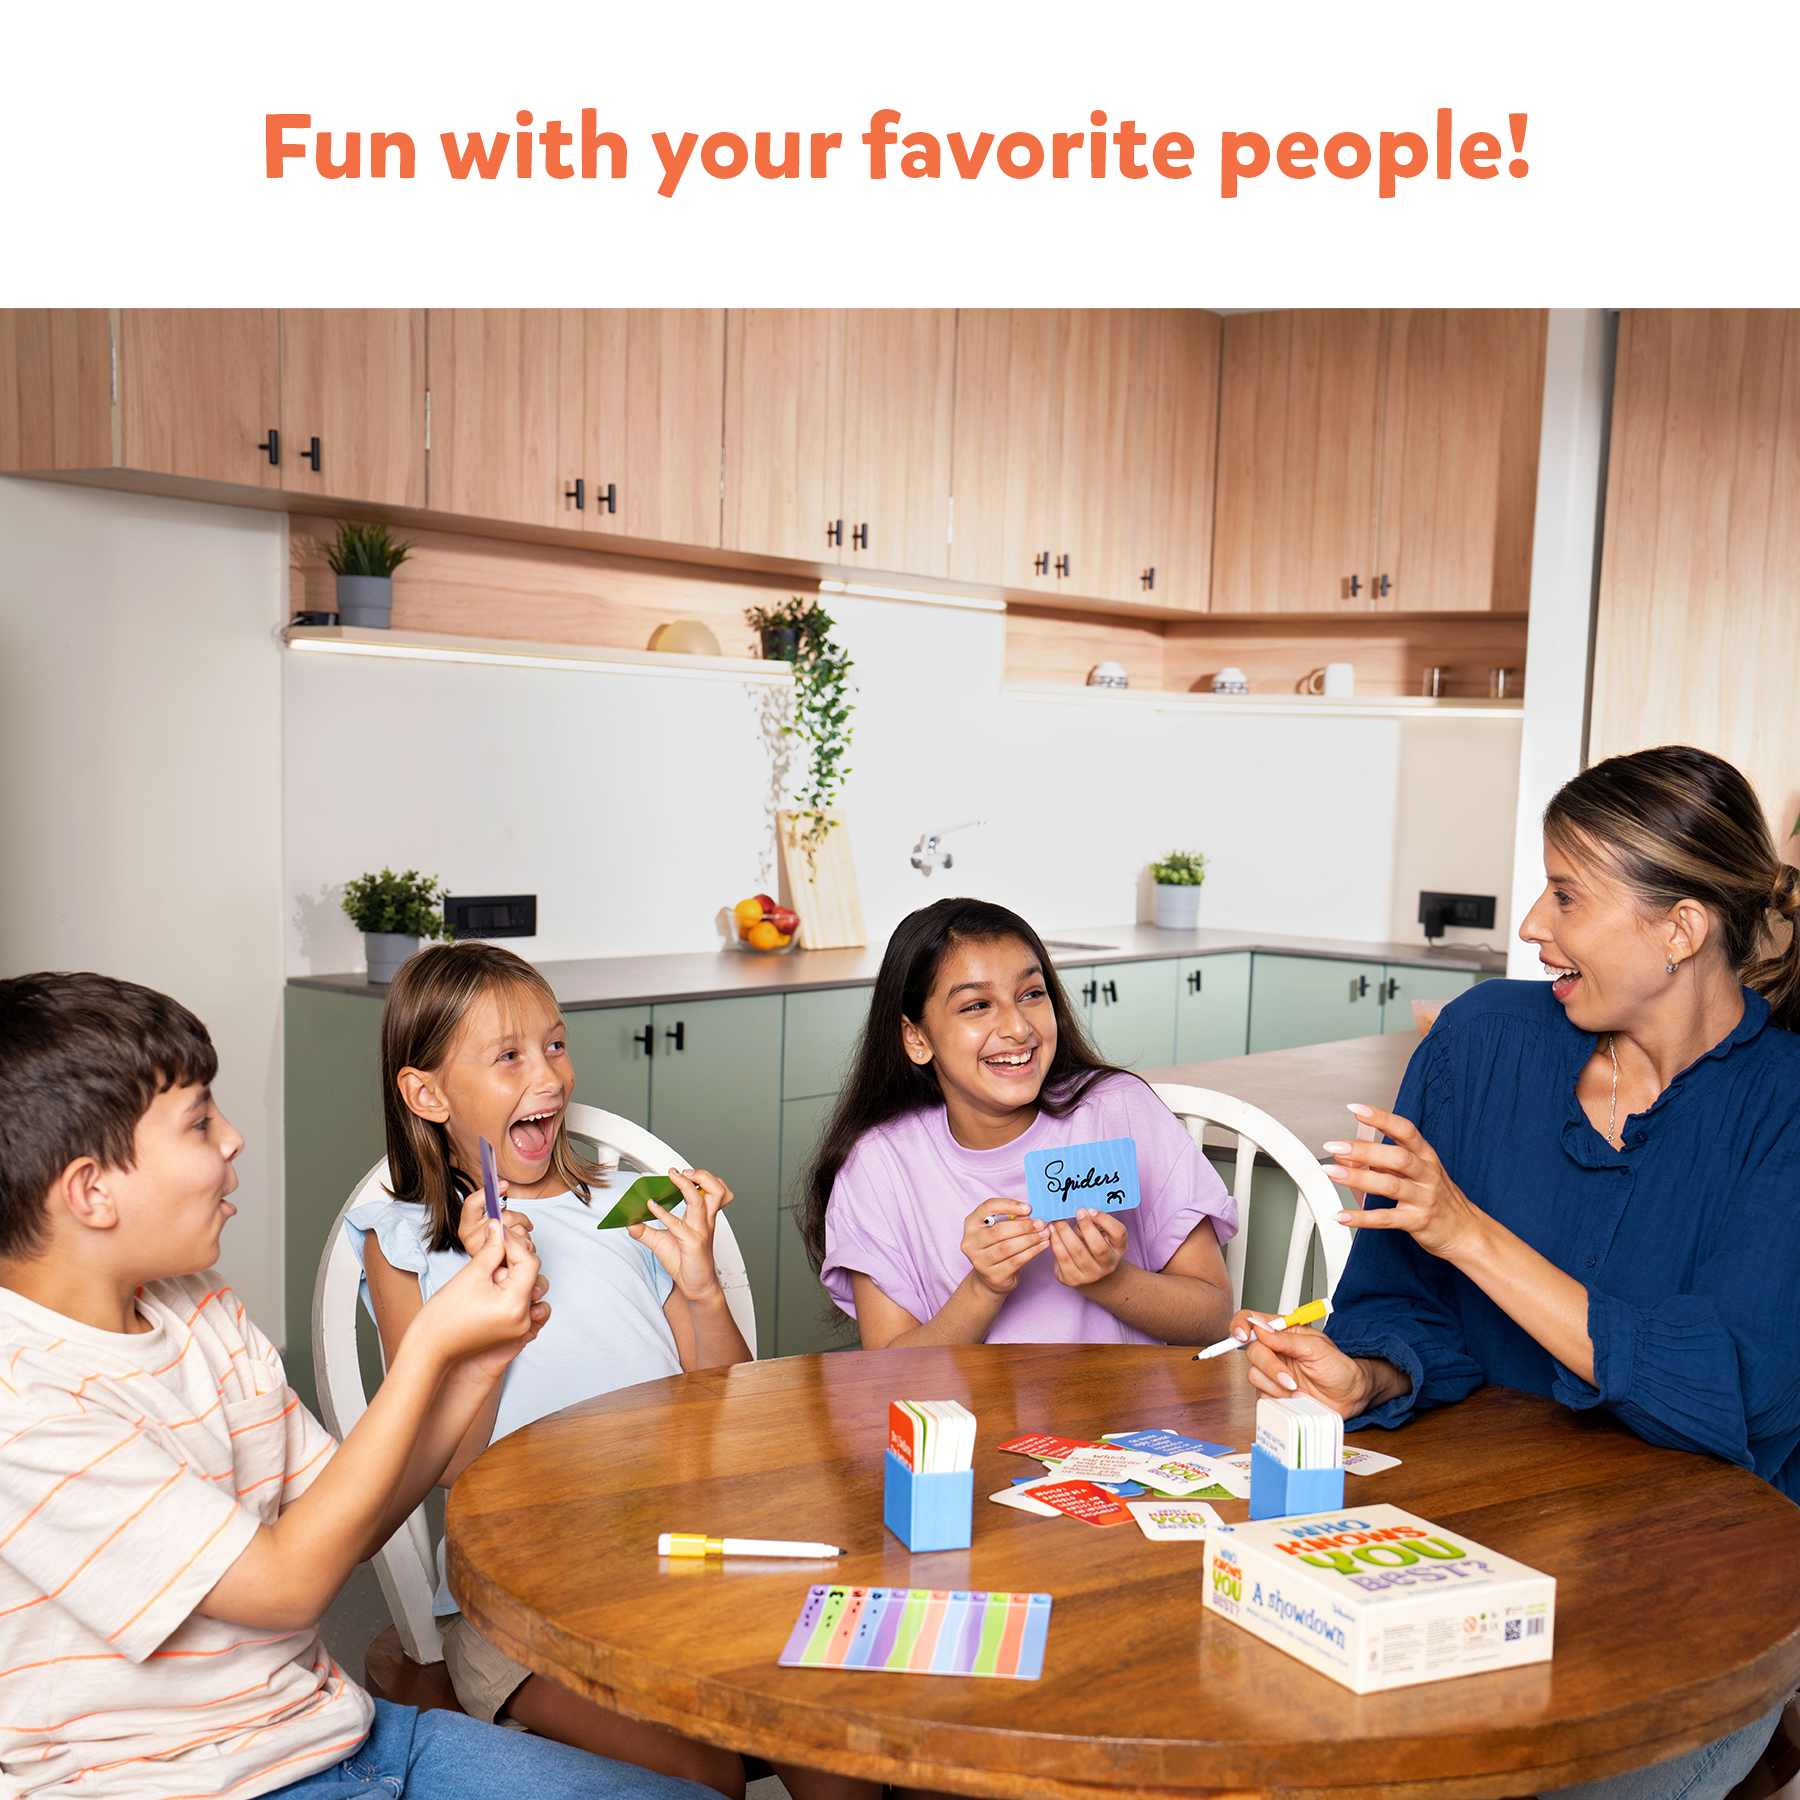 Skillmatics Card Game - Who Knows You Best? Family Party Game for Kids and Adults, Fun for Game Night